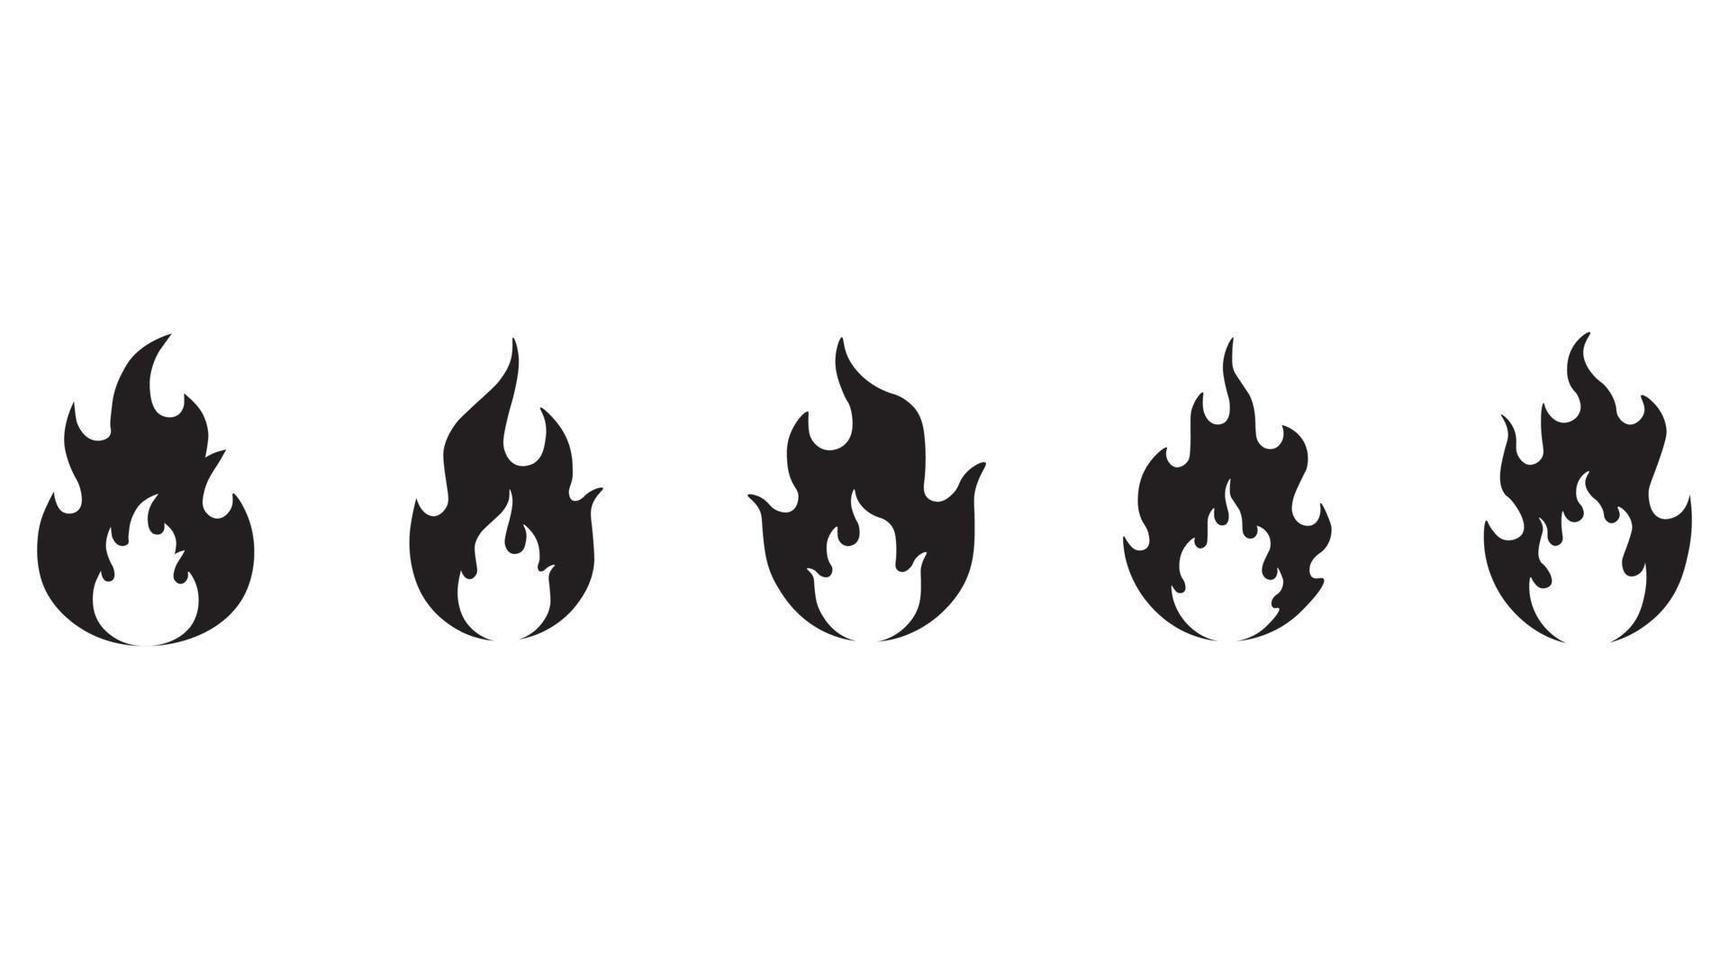 Black fire flames symbol. Set Flat Icons fire isolated on white background. Fire icon set vector. Bundle of set flame icon. vector